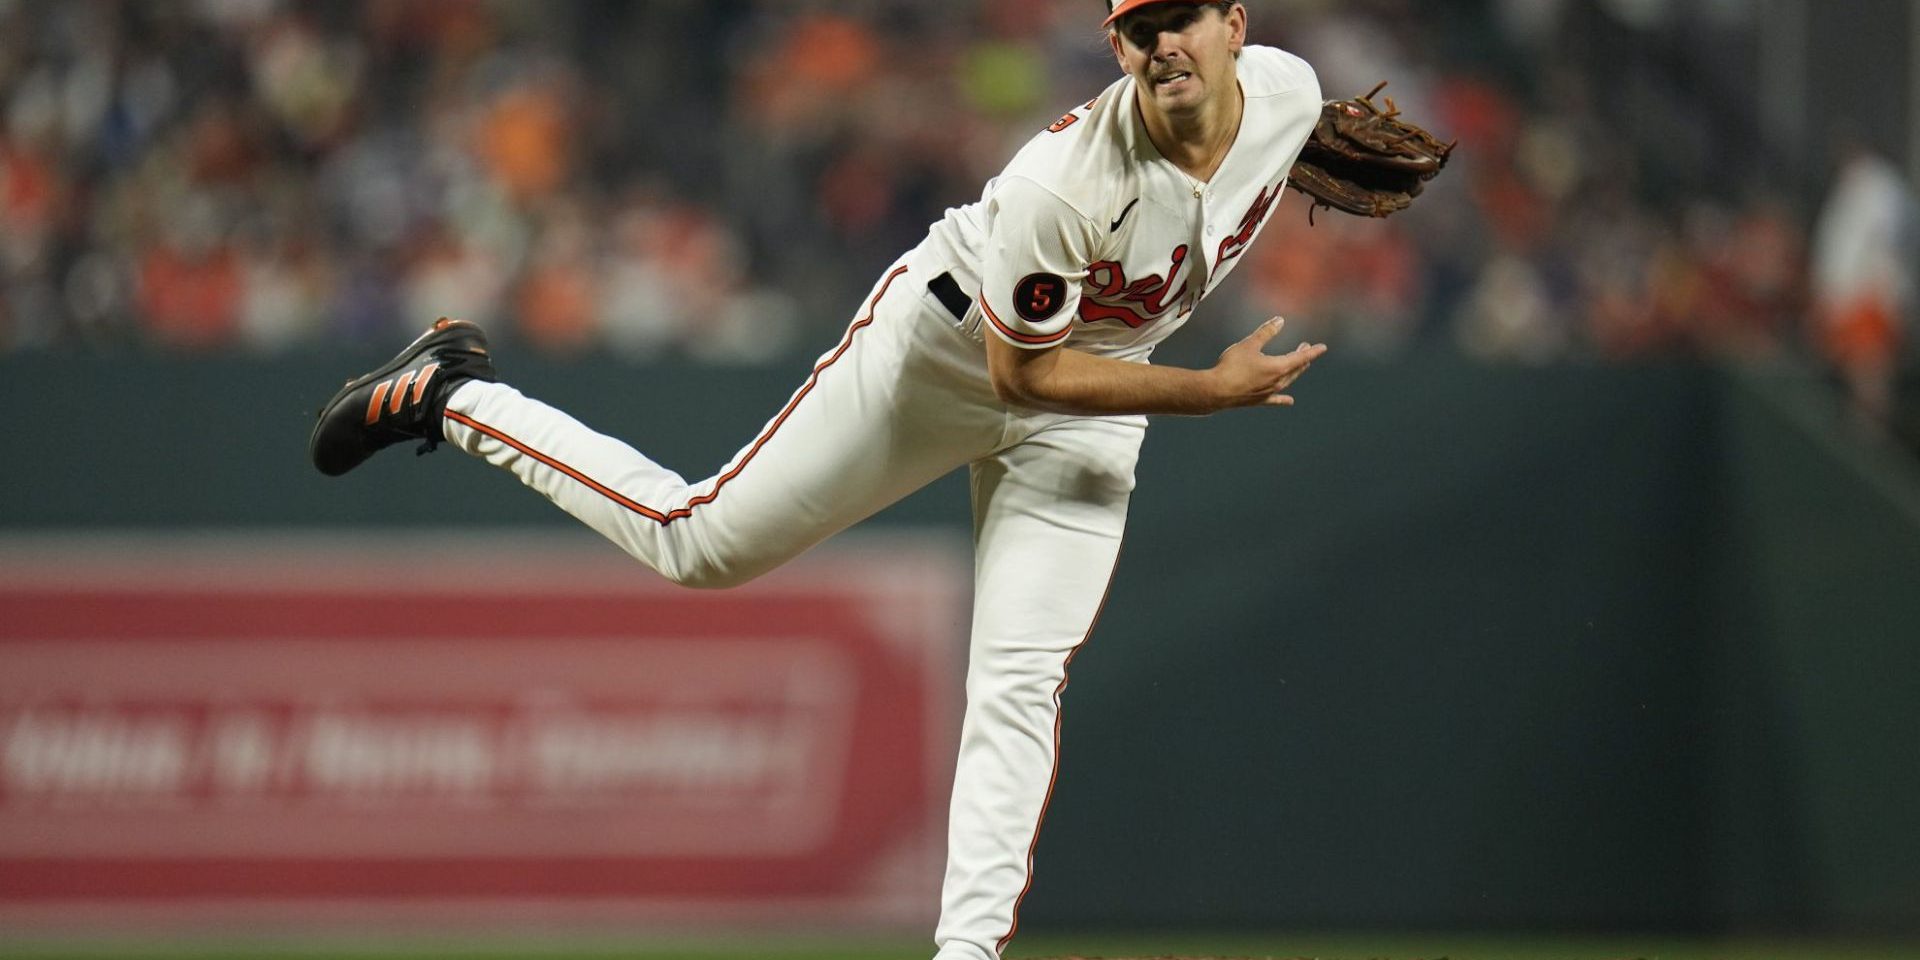 Baltimore Orioles starting pitcher Dean Kremer throws during the second inning of a baseball game between the Baltimore Orioles and the Boston Red Sox, Thursday, Sept. 28, 2023, in Baltimore. The Orioles won 2-0. (AP Photo/Julio Cortez)